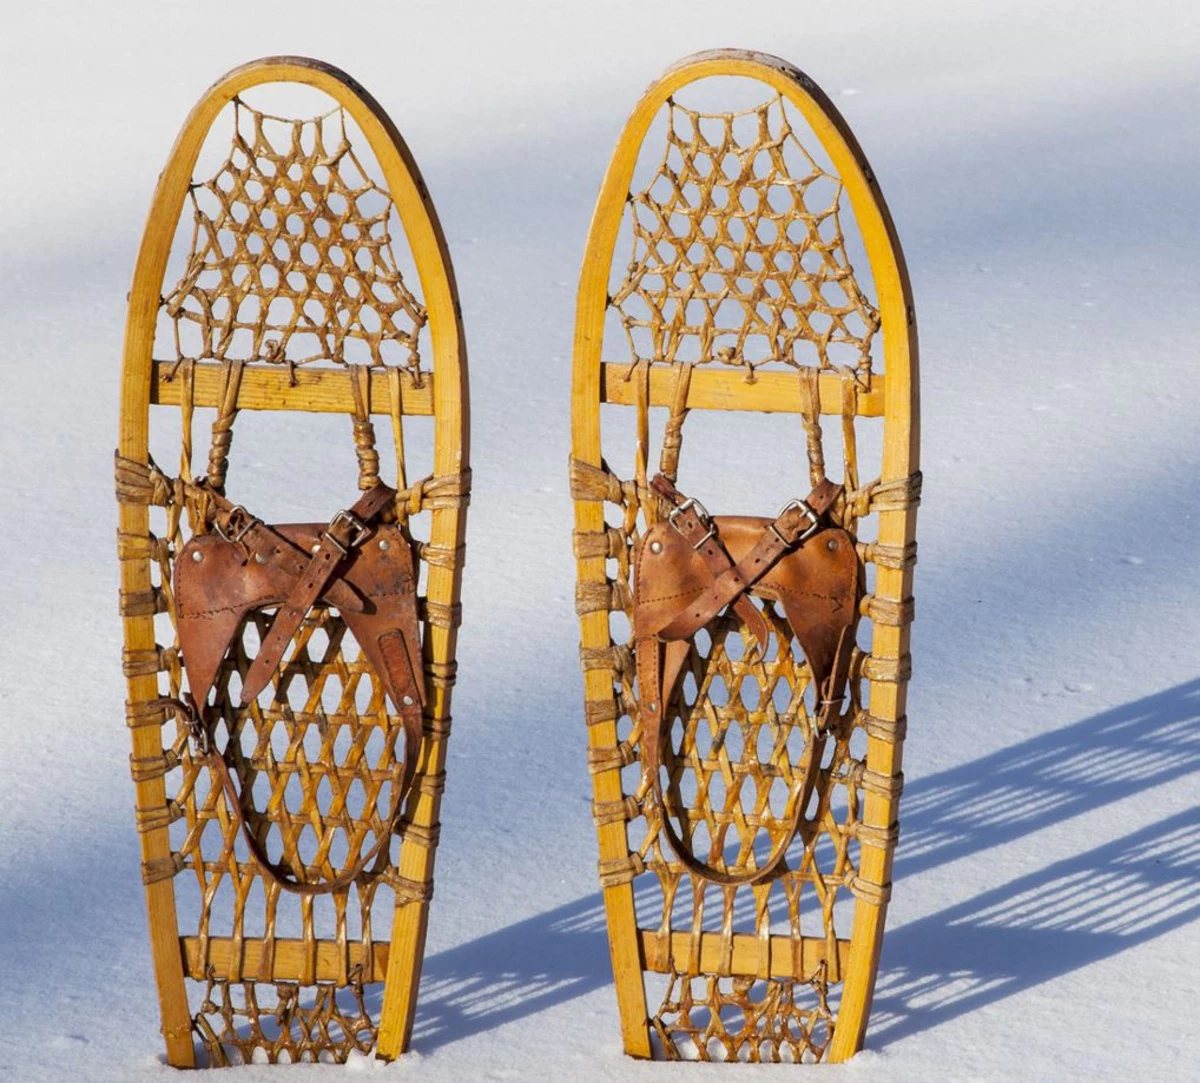 traditional snowshoes